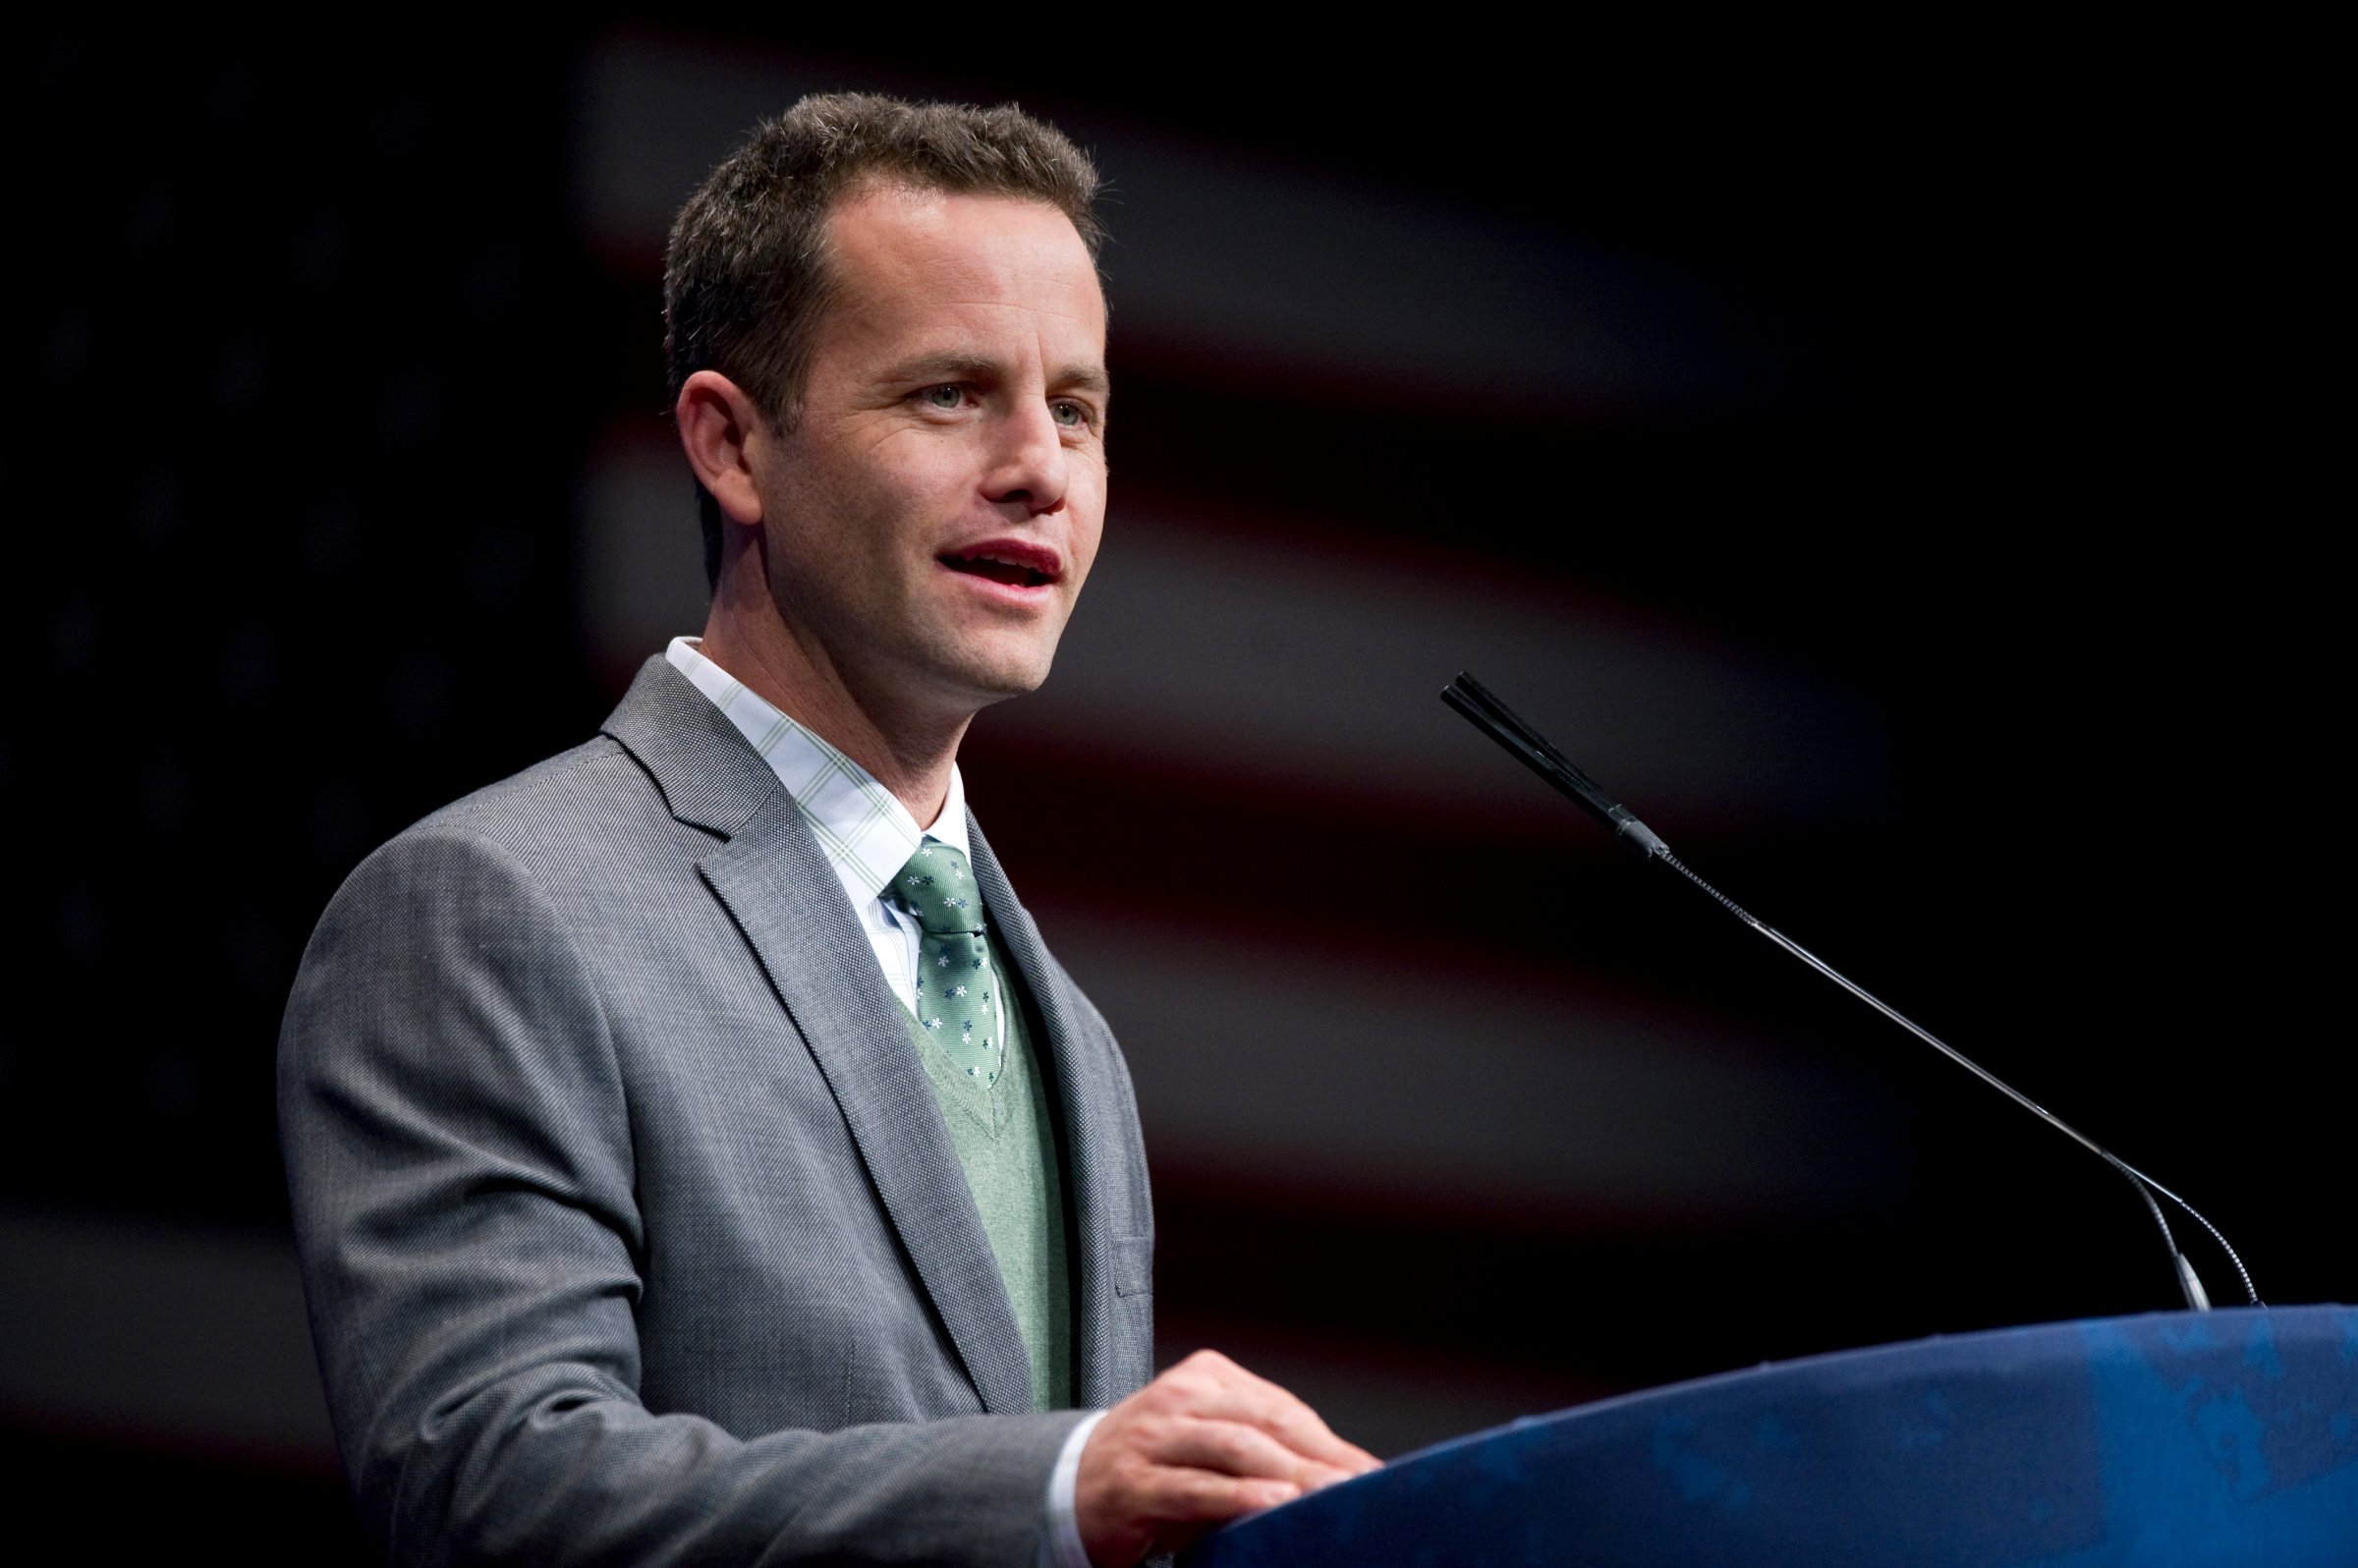 Actor Kirk Cameron speaks at the 2012 Conservative Political Action Conference in Washington, DC.